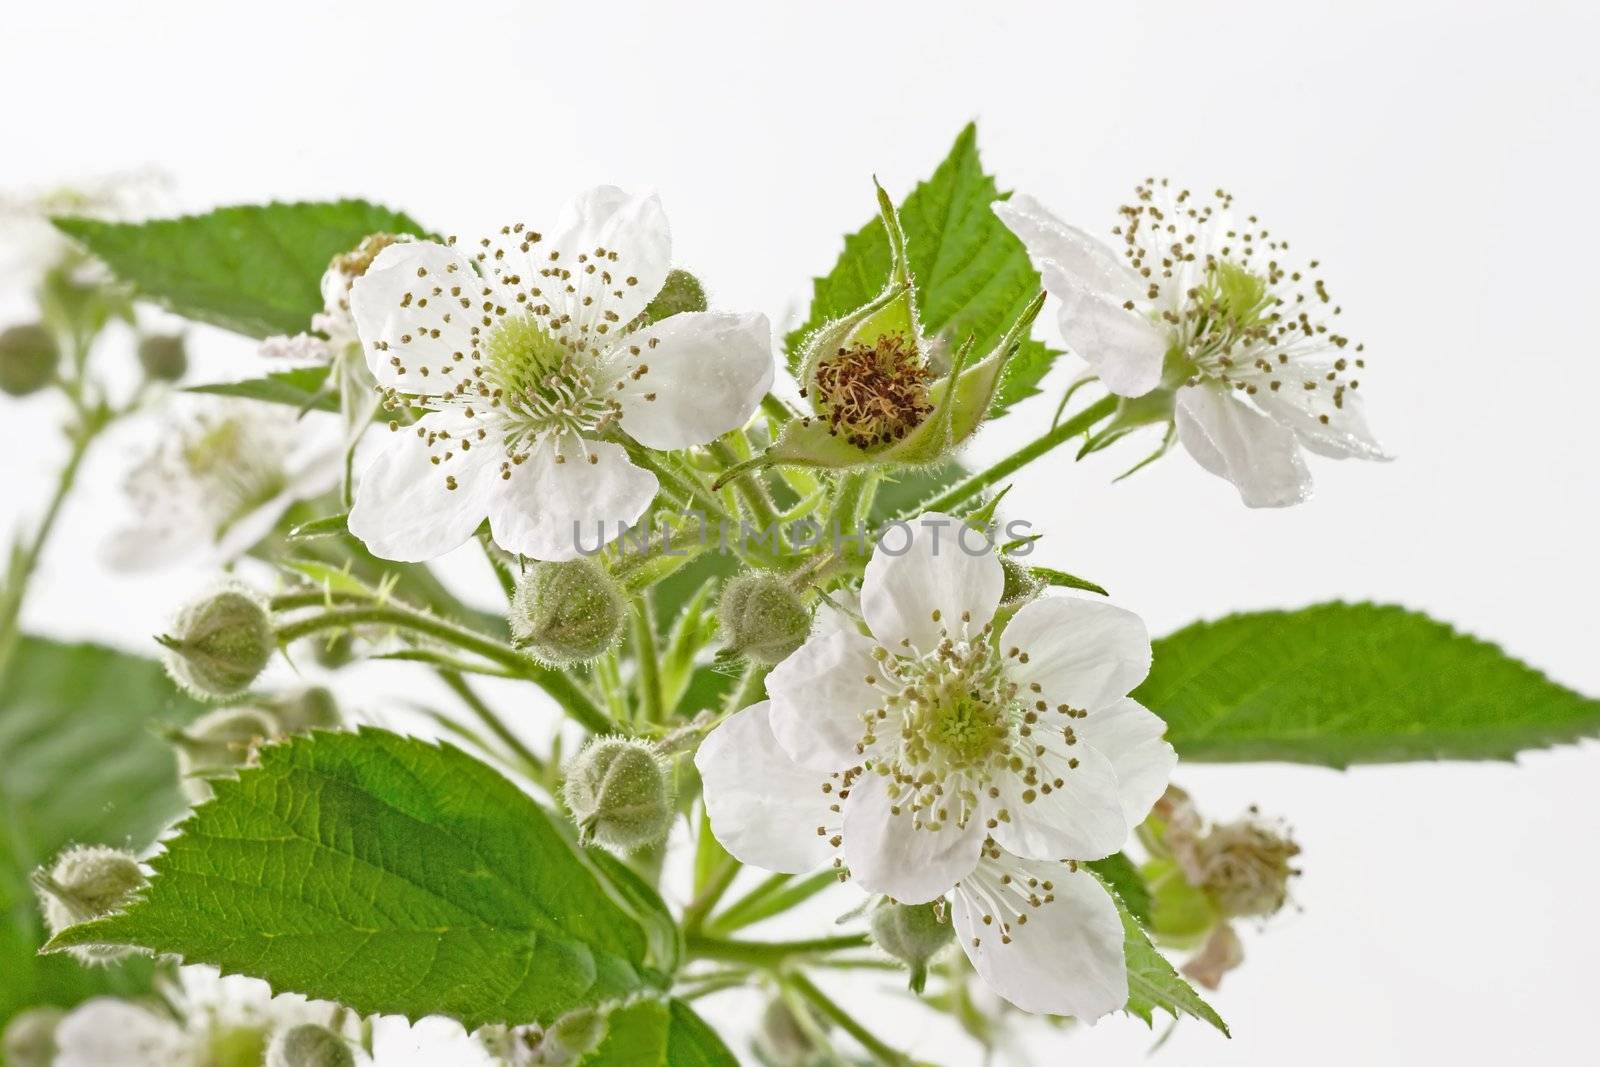 Blackberry blossoms and leaves on light background